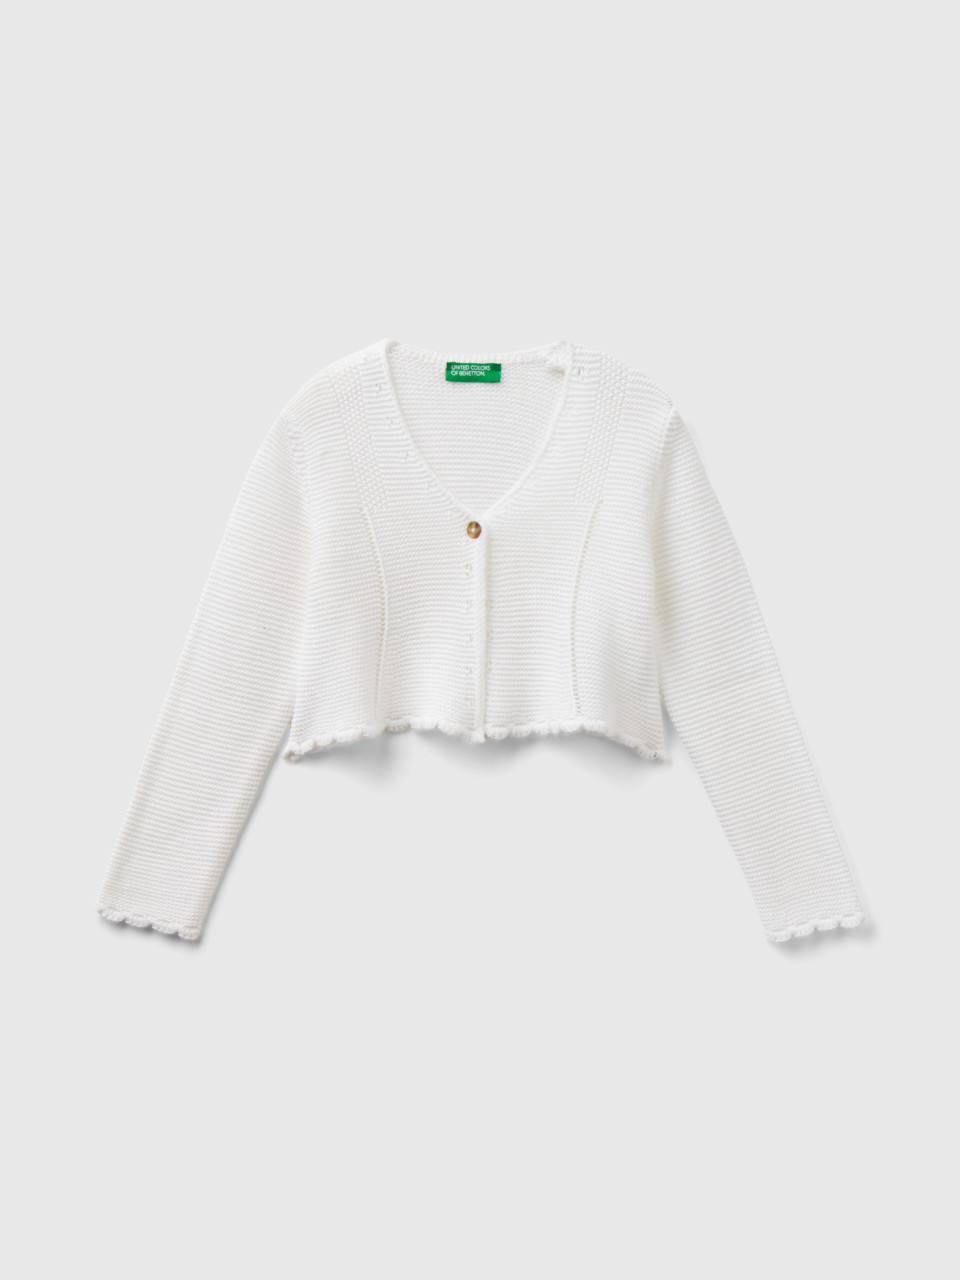 Benetton, Cardigan In Linen And Viscose Blend, White, Kids